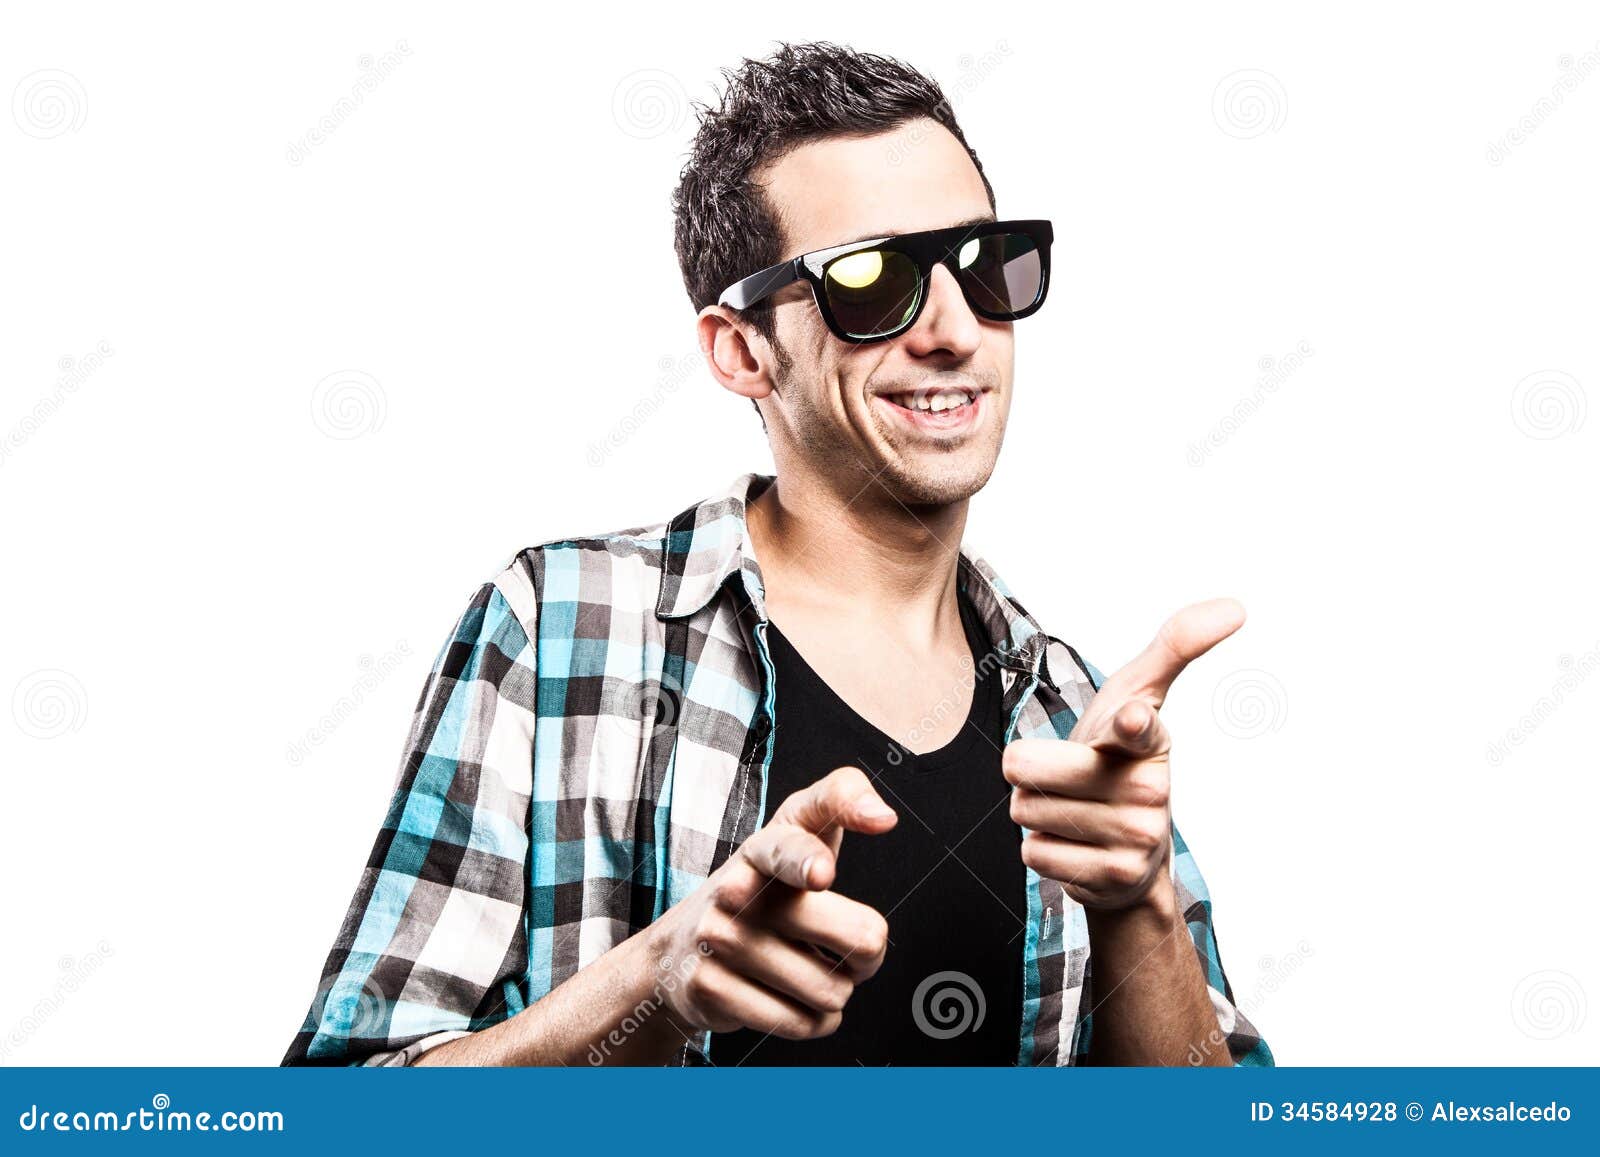 cool-man-black-sunglasses-pointing-camera-isolated-white-background-34584928.jpg